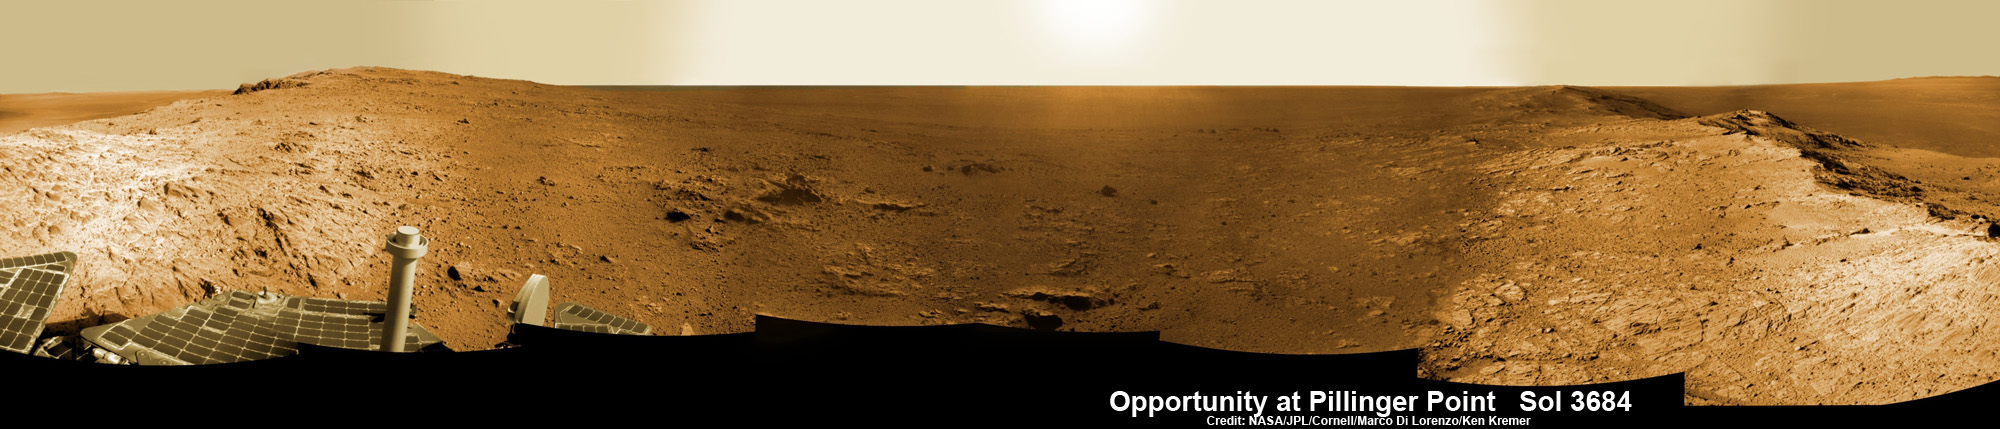 Opportunity Mars rover peers into vast Endeavour Crater from Pillinger Point mountain ridge named in honor of Colin Pillinger, the Principal Investigator for the British Beagle 2 lander built to search for life on Mars. Pillinger passed away from a brain hemorrhage on May 7, 2014.  This navcam camera photo mosaic was assembled from images taken on June 5, 2014 (Sol 3684) and colorized.  Credit: NASA/JPL/Cornell/Marco Di Lorenzo/Ken Kremer-kenkremer.com